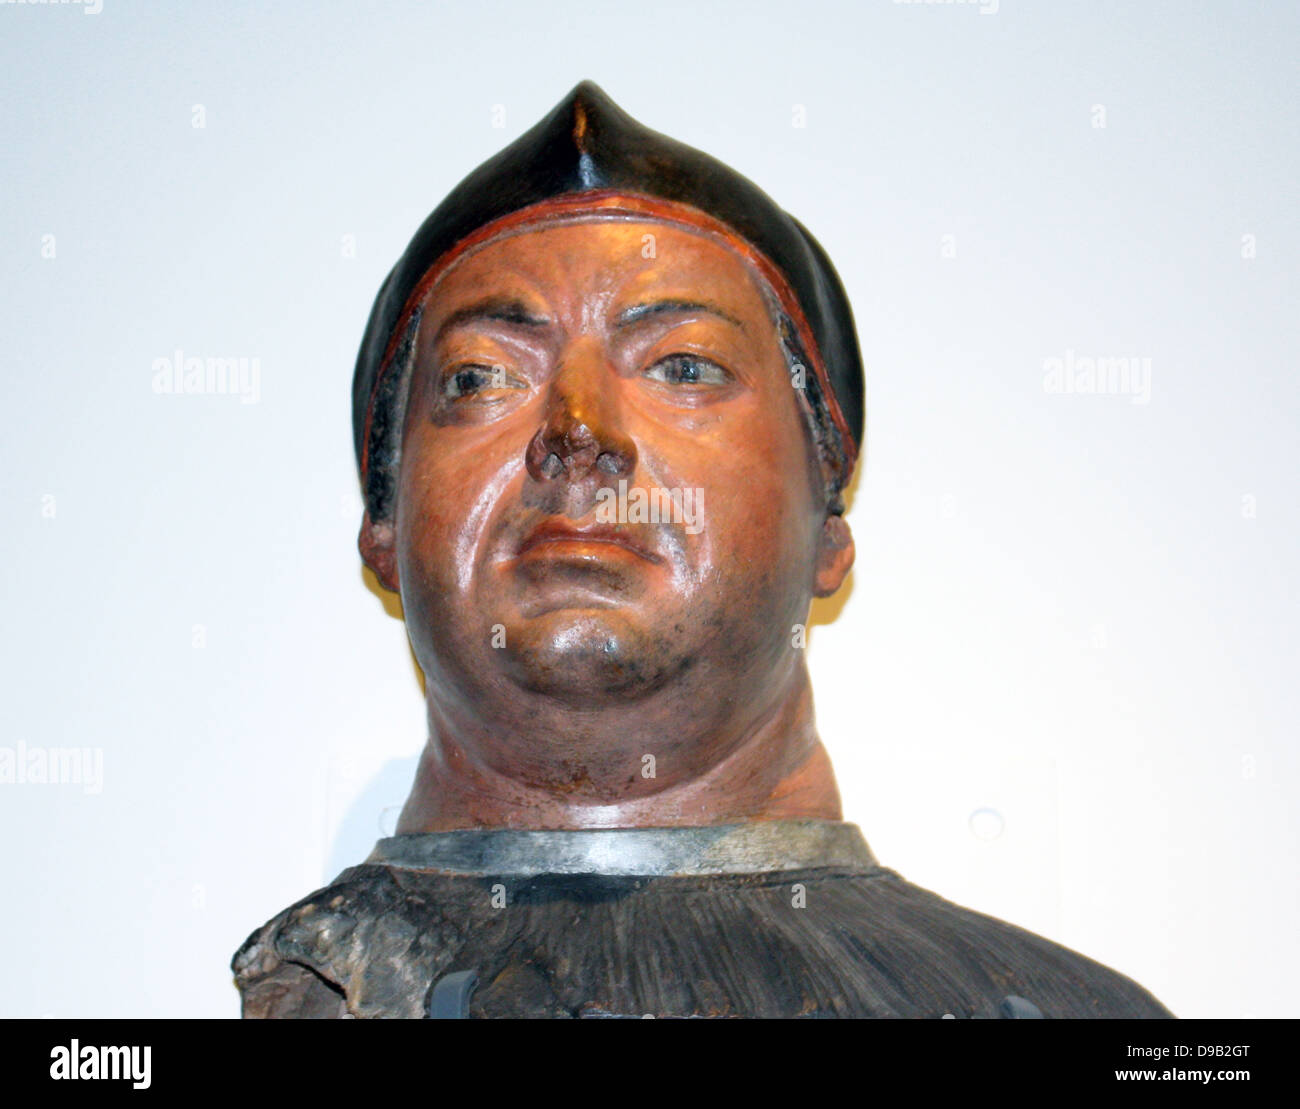 Cardinal Giovanni De' Medici (circa 1512) became Pope Leo X in 1513, is shown here while still a cardinal.  Made from a life cast of Giovanni's face, the bust in naturalistically painted, including his stubble.  Italy, Florence, Terracotta, painted. Stock Photo